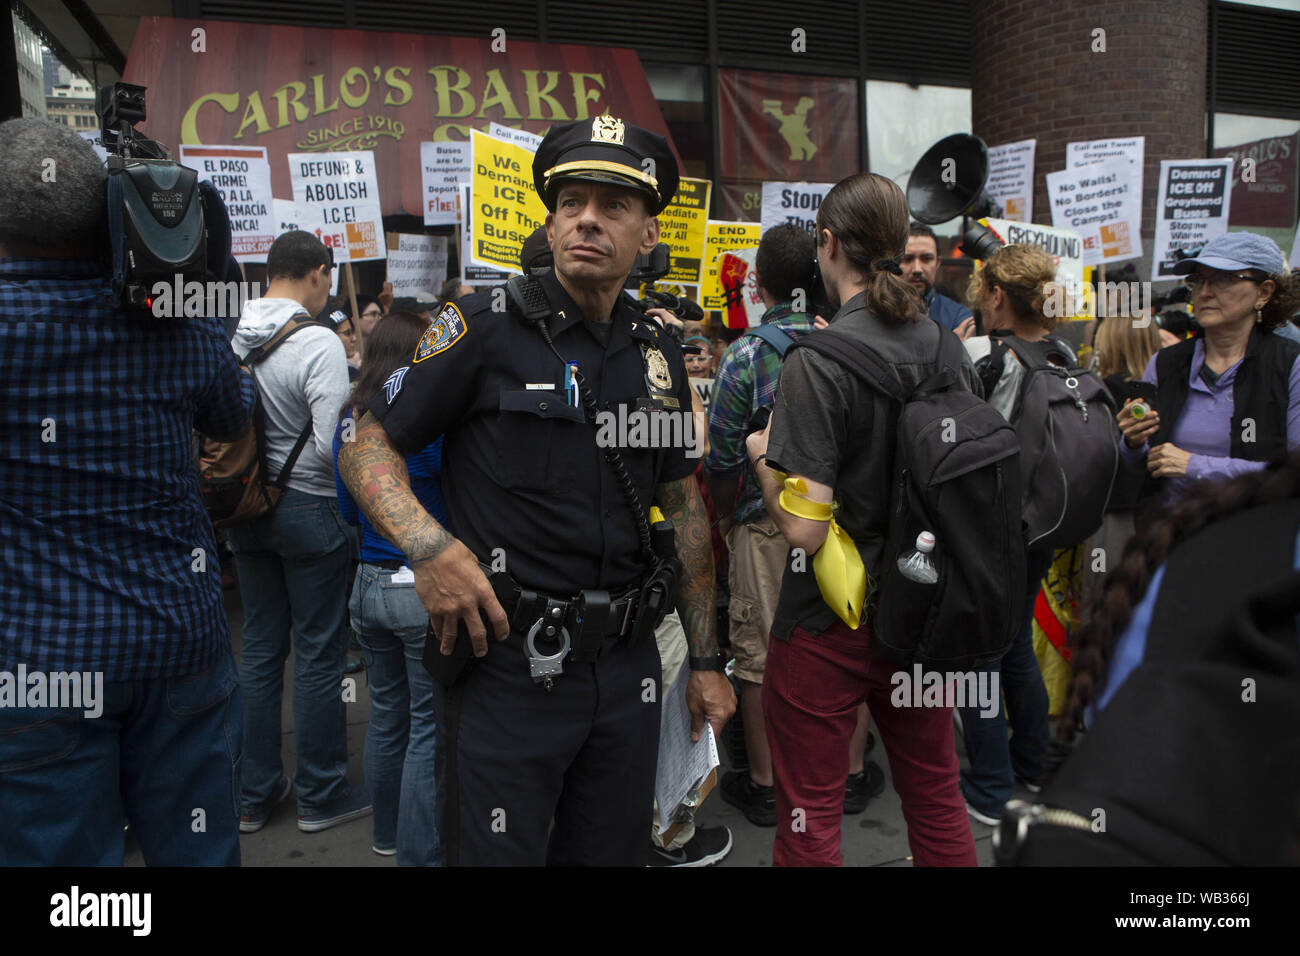 August 23, 2019: A New York Police officer stands in front of a protest against Greyhound Corporation and ICE (Immigration Customs and Enforcement) at the Port Authority Bus Terminal on 42nd and 8th Avenue in New York, New York. About 100 activists from a coalition of groups including FIRE (Fight For Immigrant Refugees Everywhere) protested Greyhound allowing ICE agents to board their busses 'searching for migrants,'' officials said. Credit: Brian Branch Price/ZUMA Wire/Alamy Live News Stock Photo